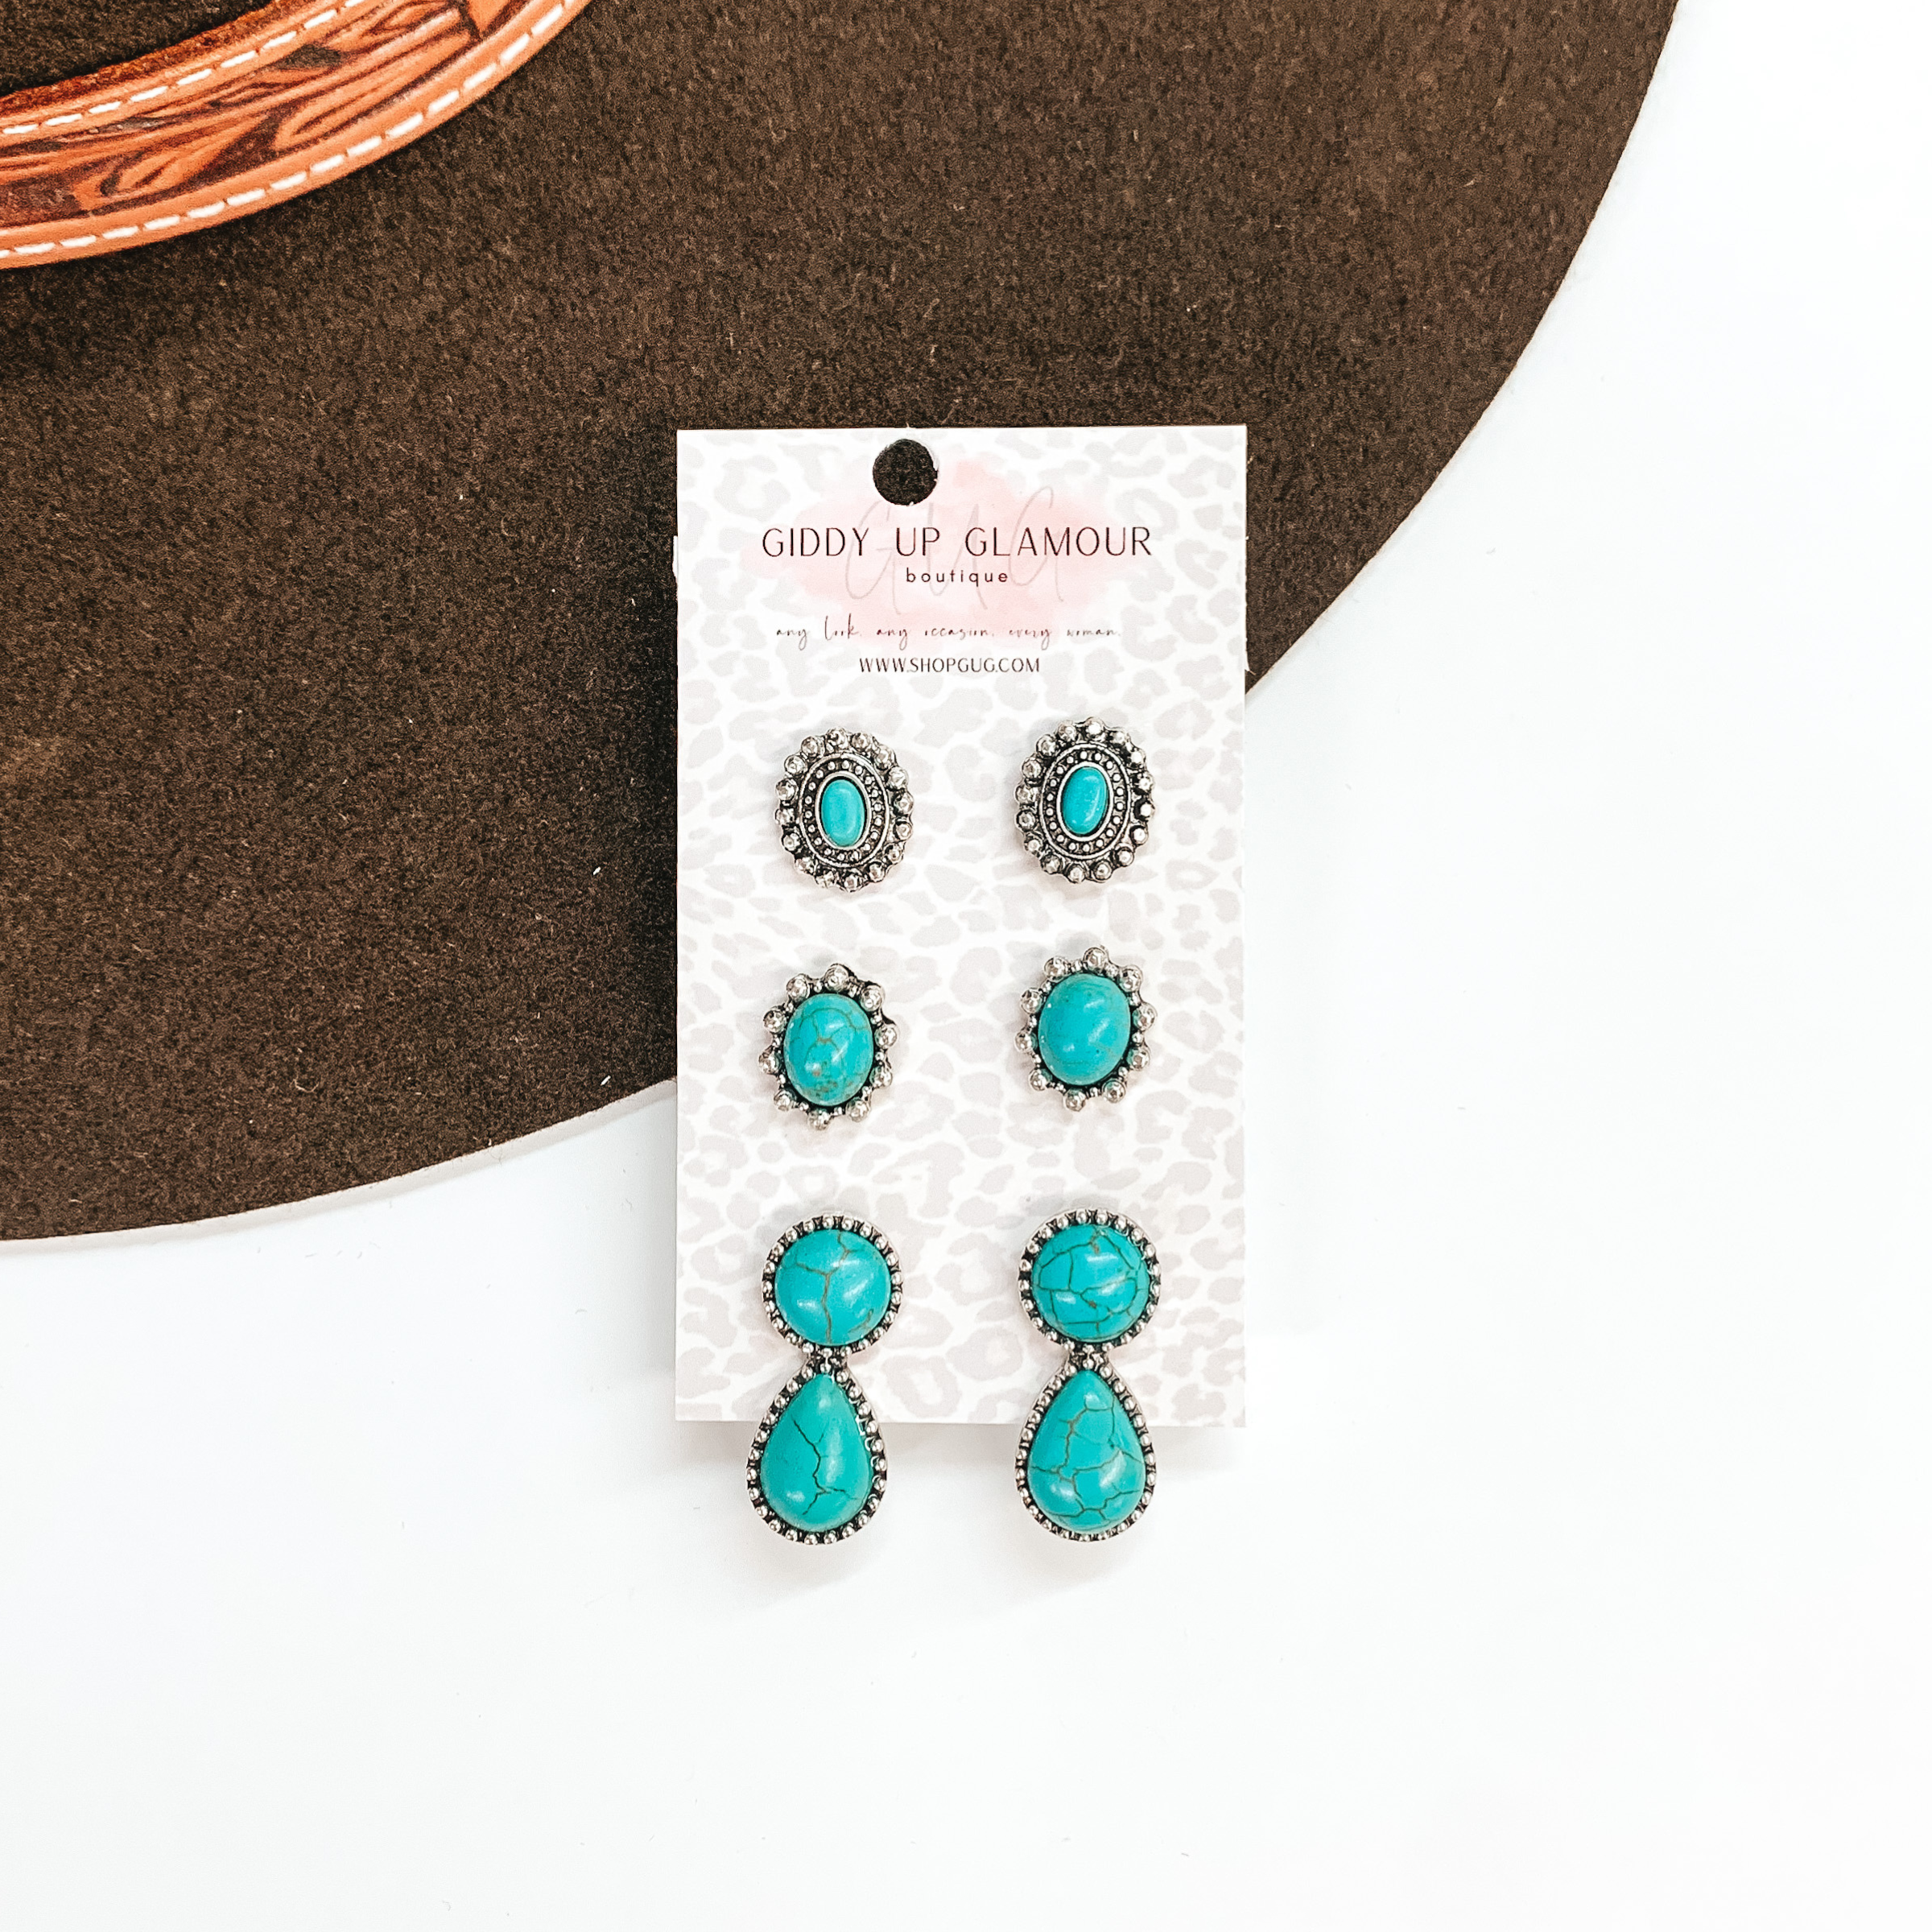 Set of three turquoise and silver earrings in different sizes. The top  pair is a silver concho with a small stone in the center. The middle pair  is a larger oval stone with silver pointy edges. The bottom pair has a  circle stone connected to a teardrop shaped stone in a silver setting.  These earrings are placed on a white  and grey leopard card holder, the earrings are taken on a dark brown hat  brim and a white background.